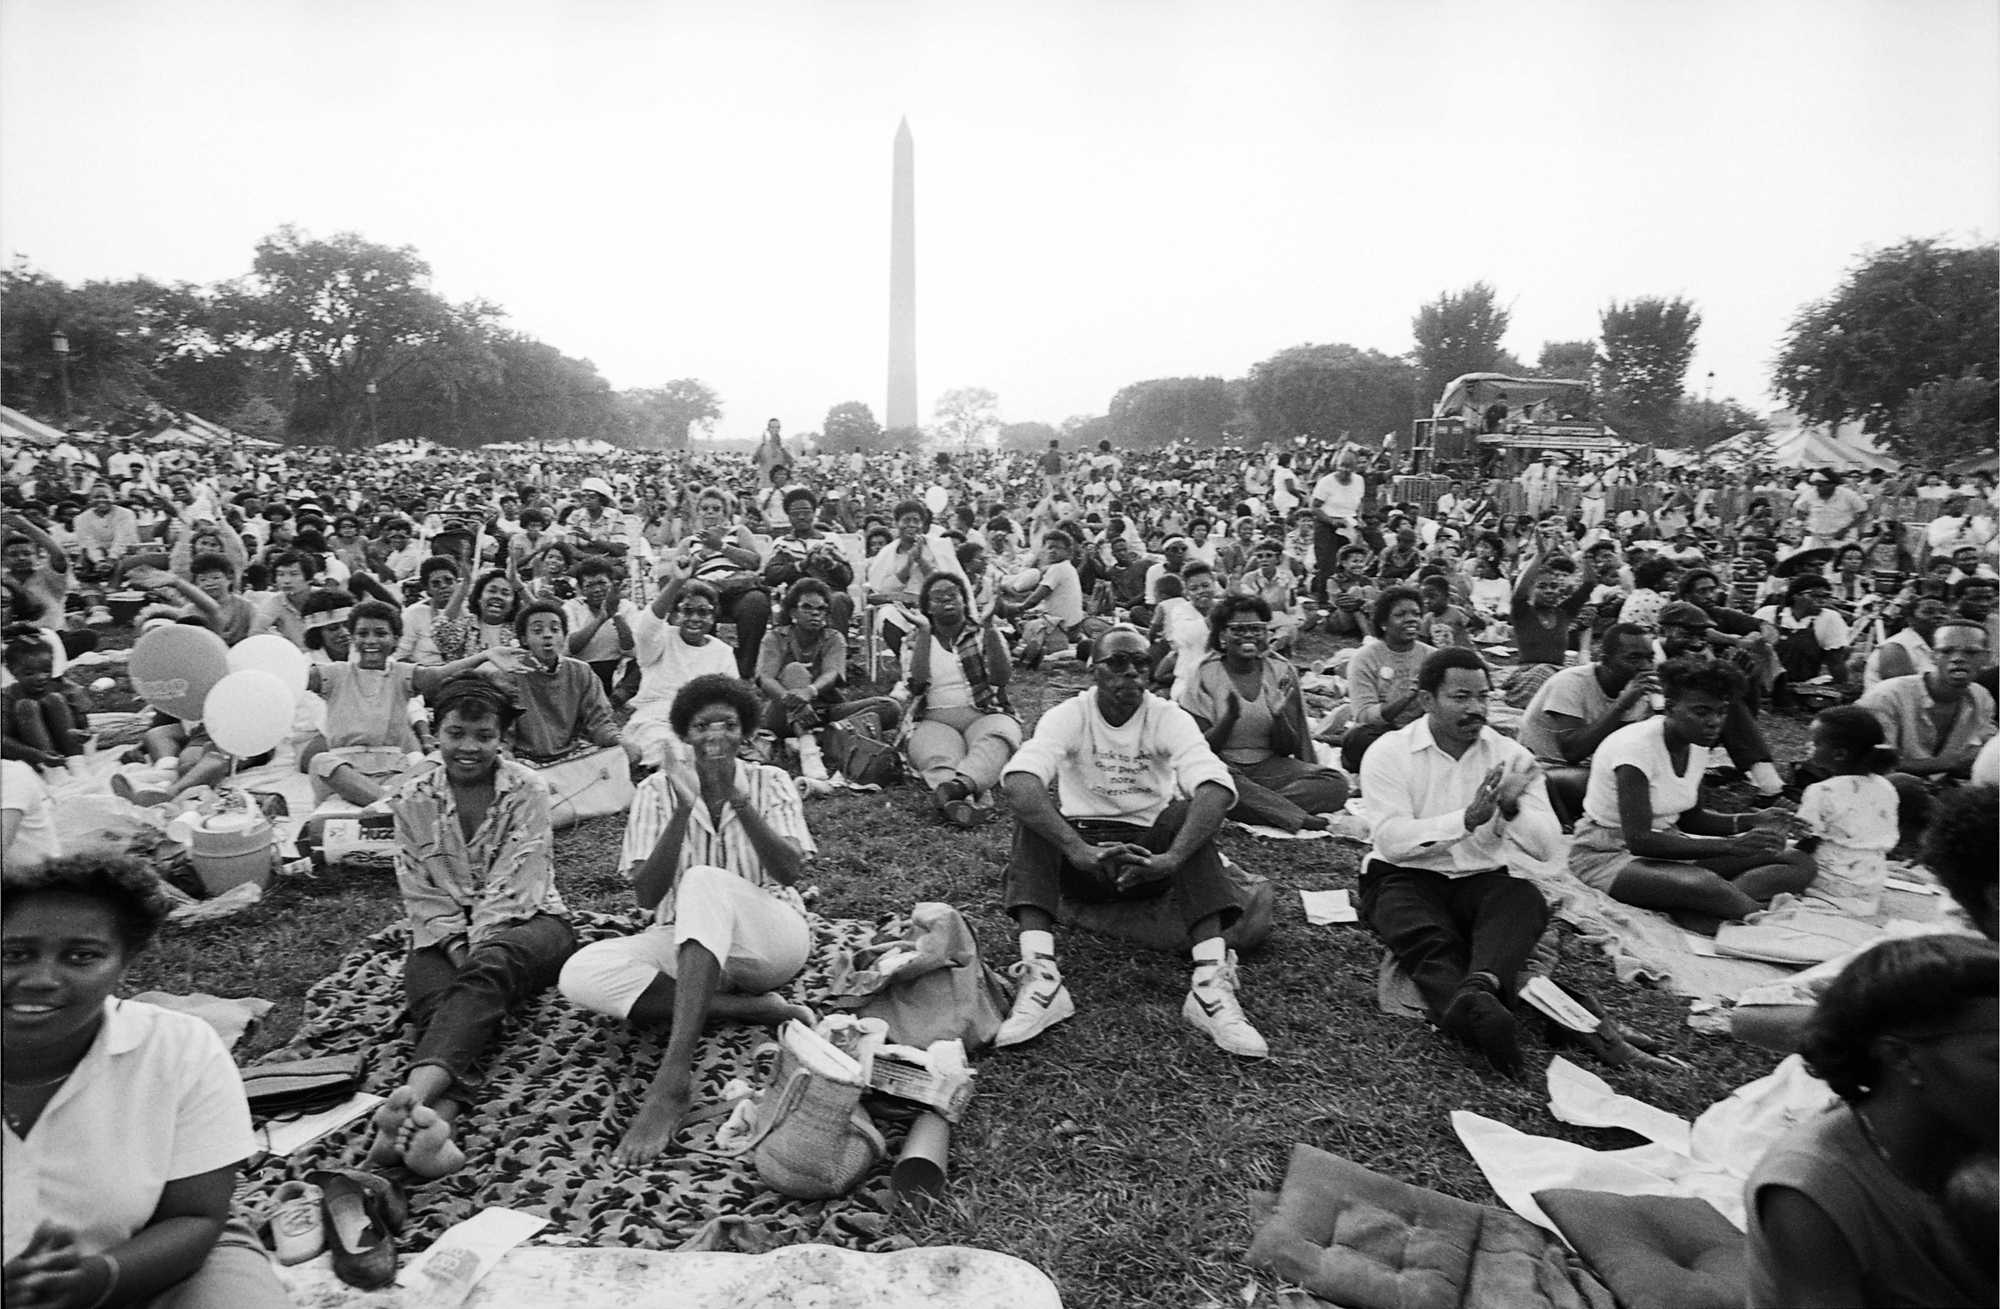 Photograph of picnic goers seated in front of the Washington Monument